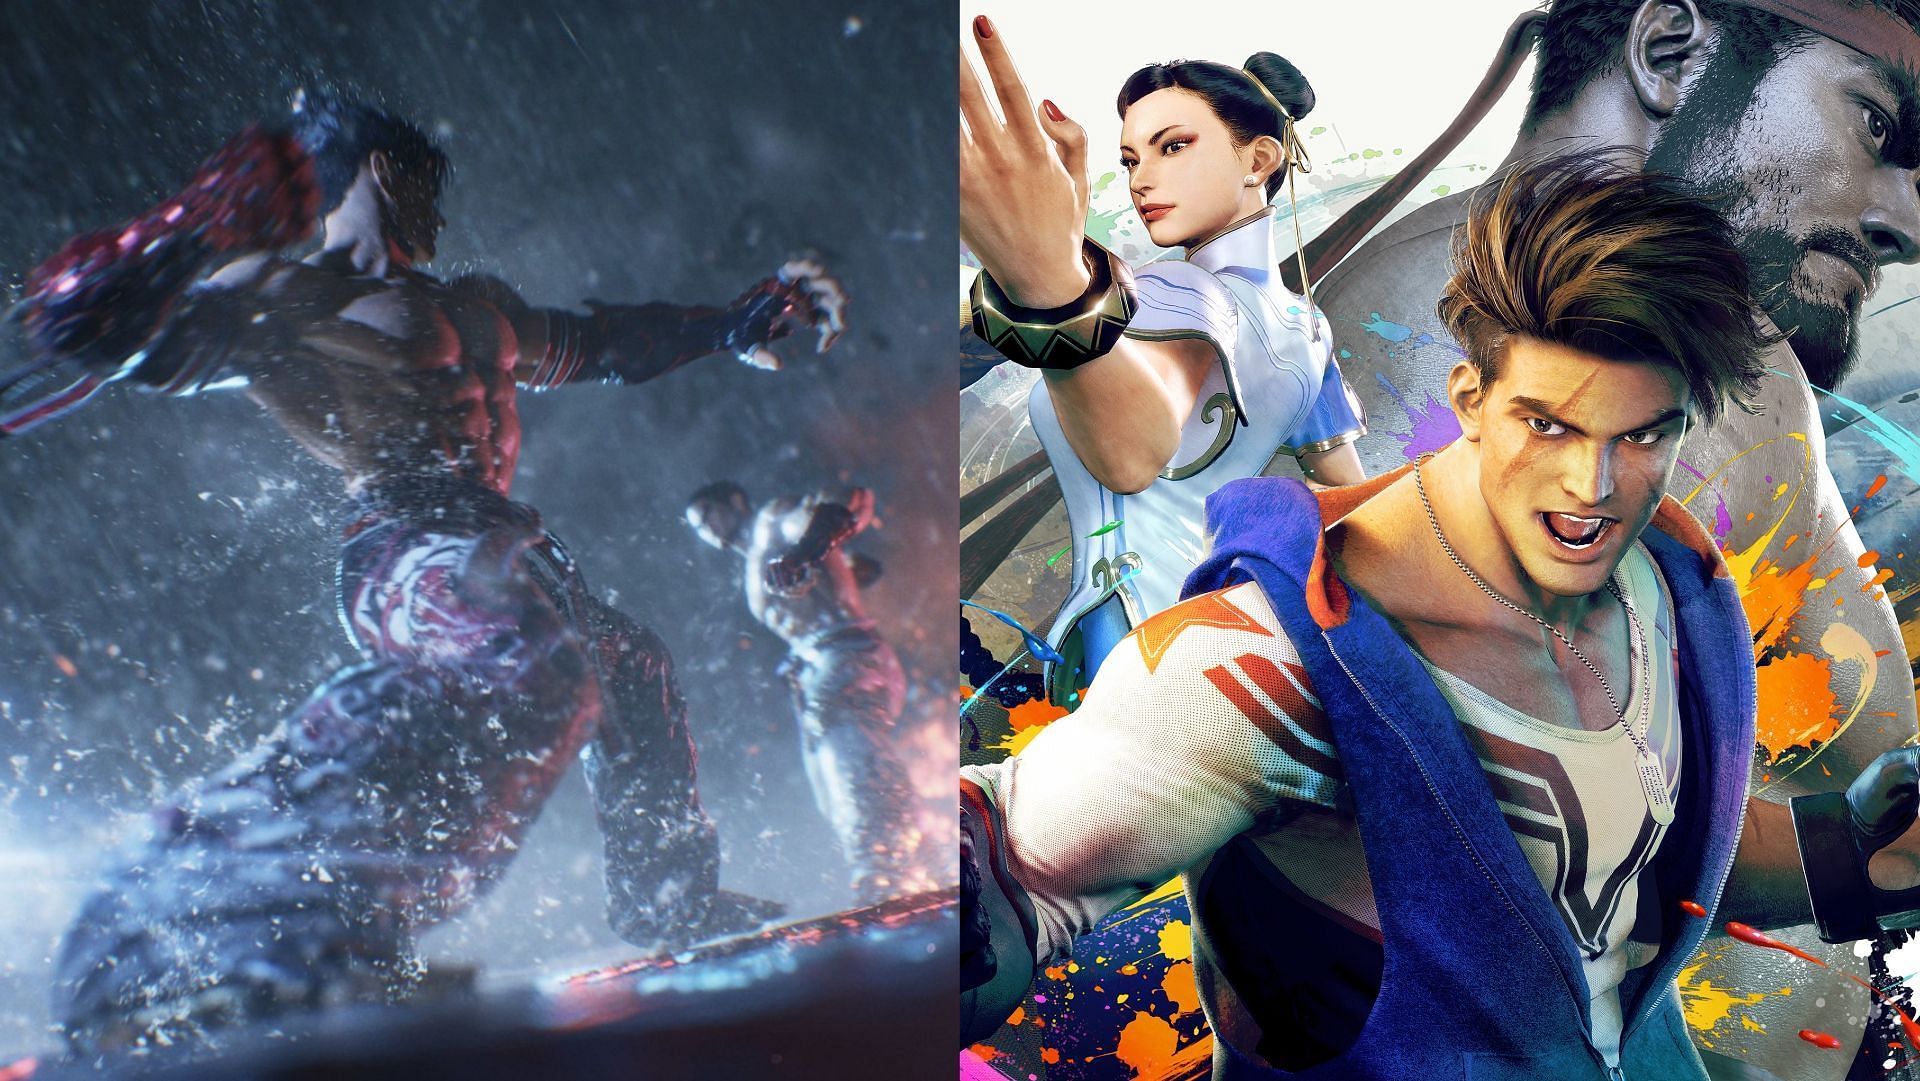 Game Awards 2022 live stream to start at 4:30 PT, announcements for Street  Fighter 6, Tekken 8, and more expected